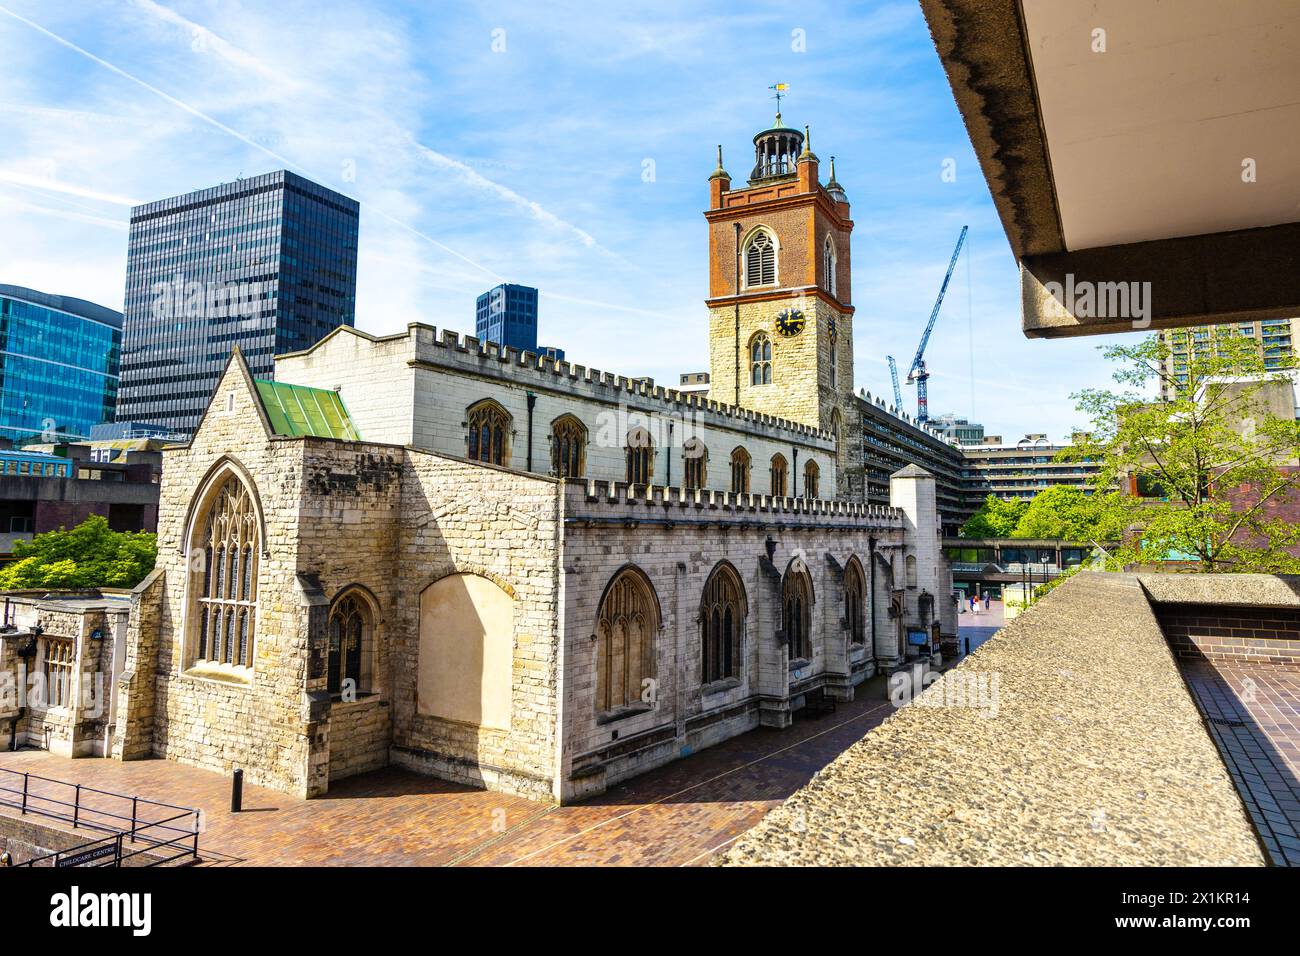 St Giles Cripplegate Church located on the Barbican Estate, one of the few medieval left in London, England Stock Photo